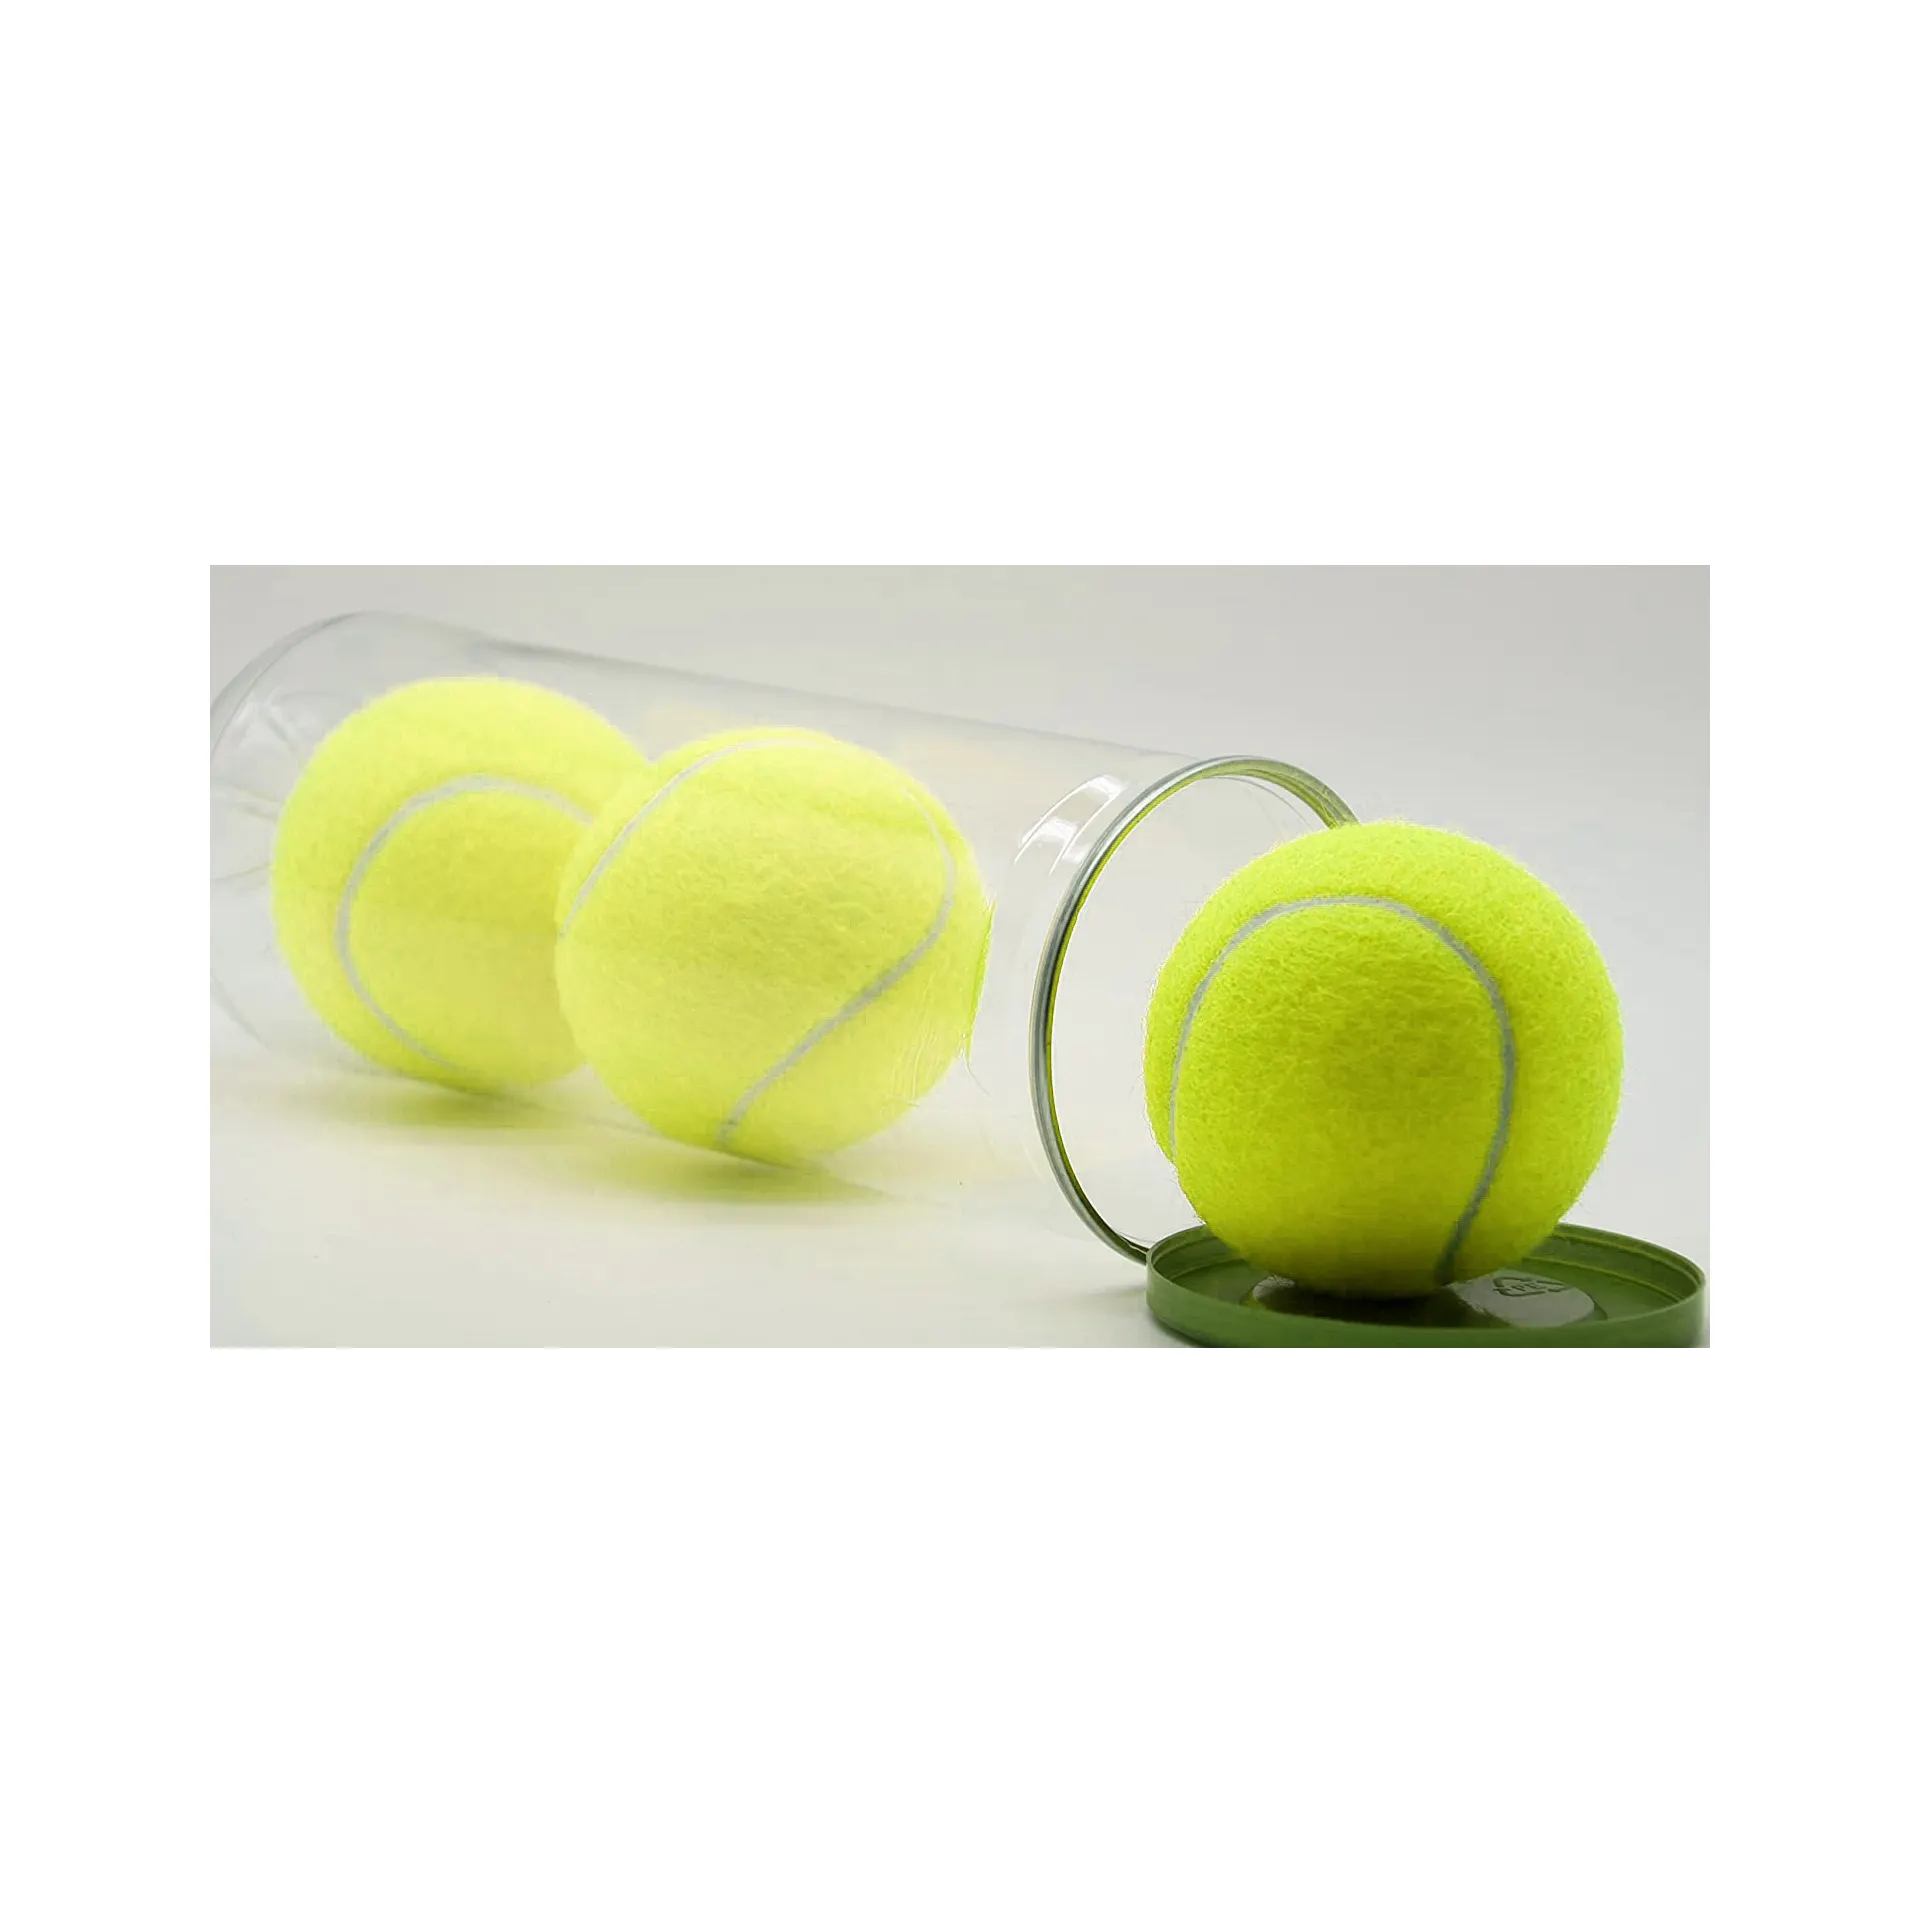 High quality standard size weight wholesale 3PCS/Can tennis ball cricket balls wholesale custom logo for training fitness